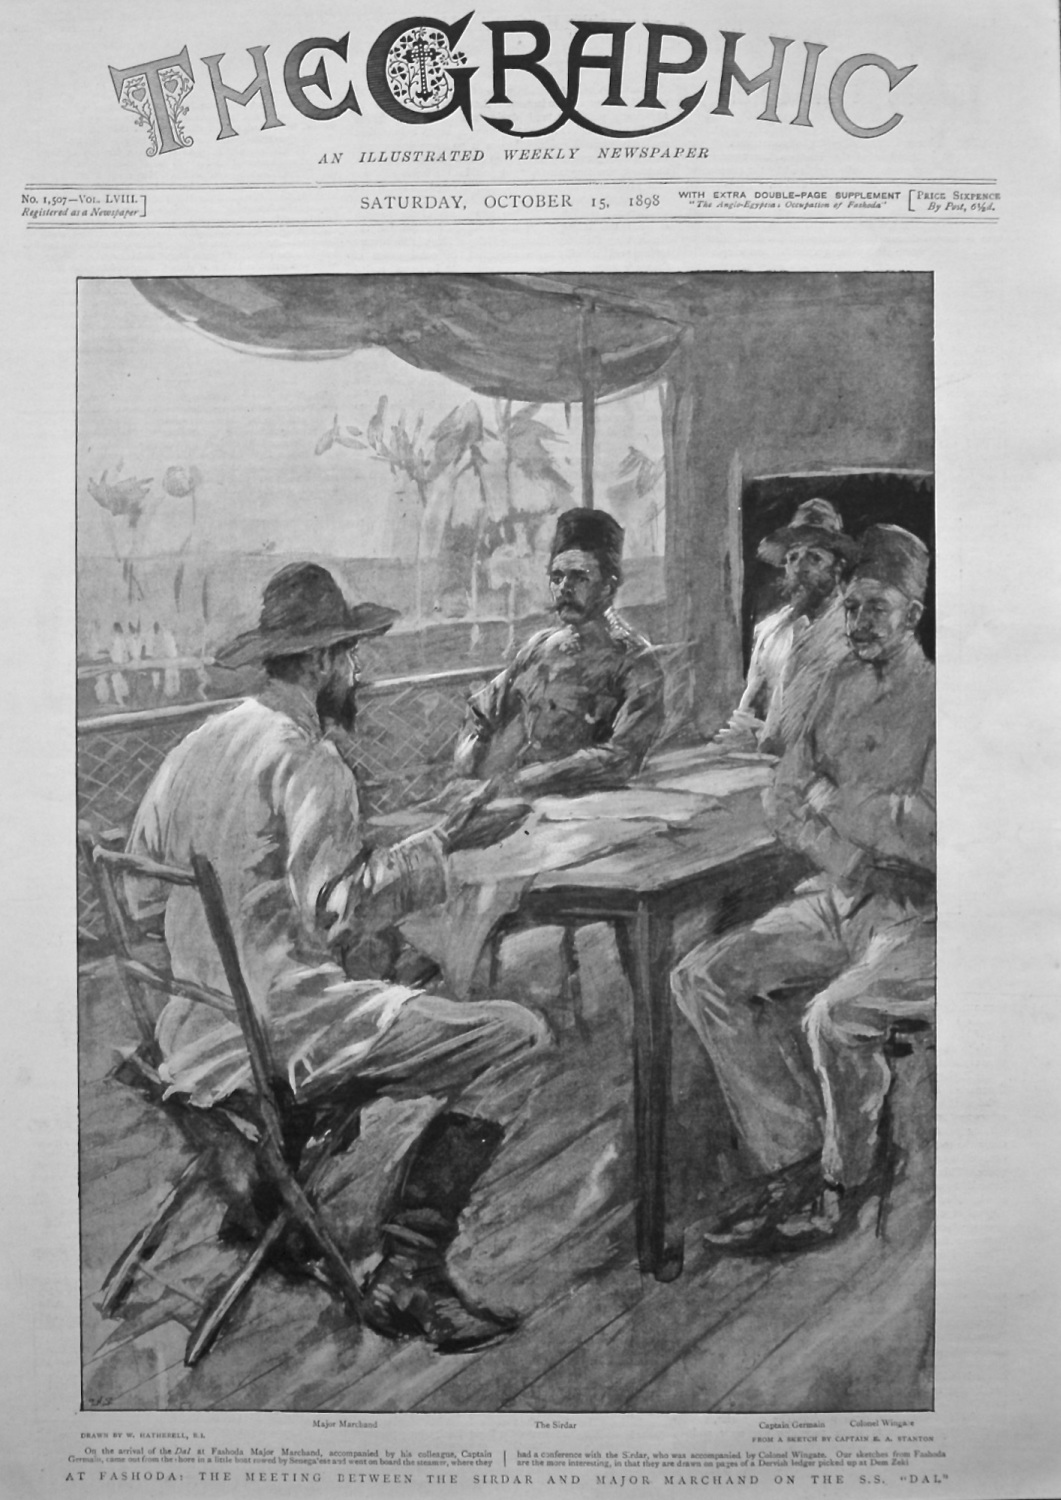 At Fashoda : The Meeting between the Sirdar and Major Marchand on the S.S. 